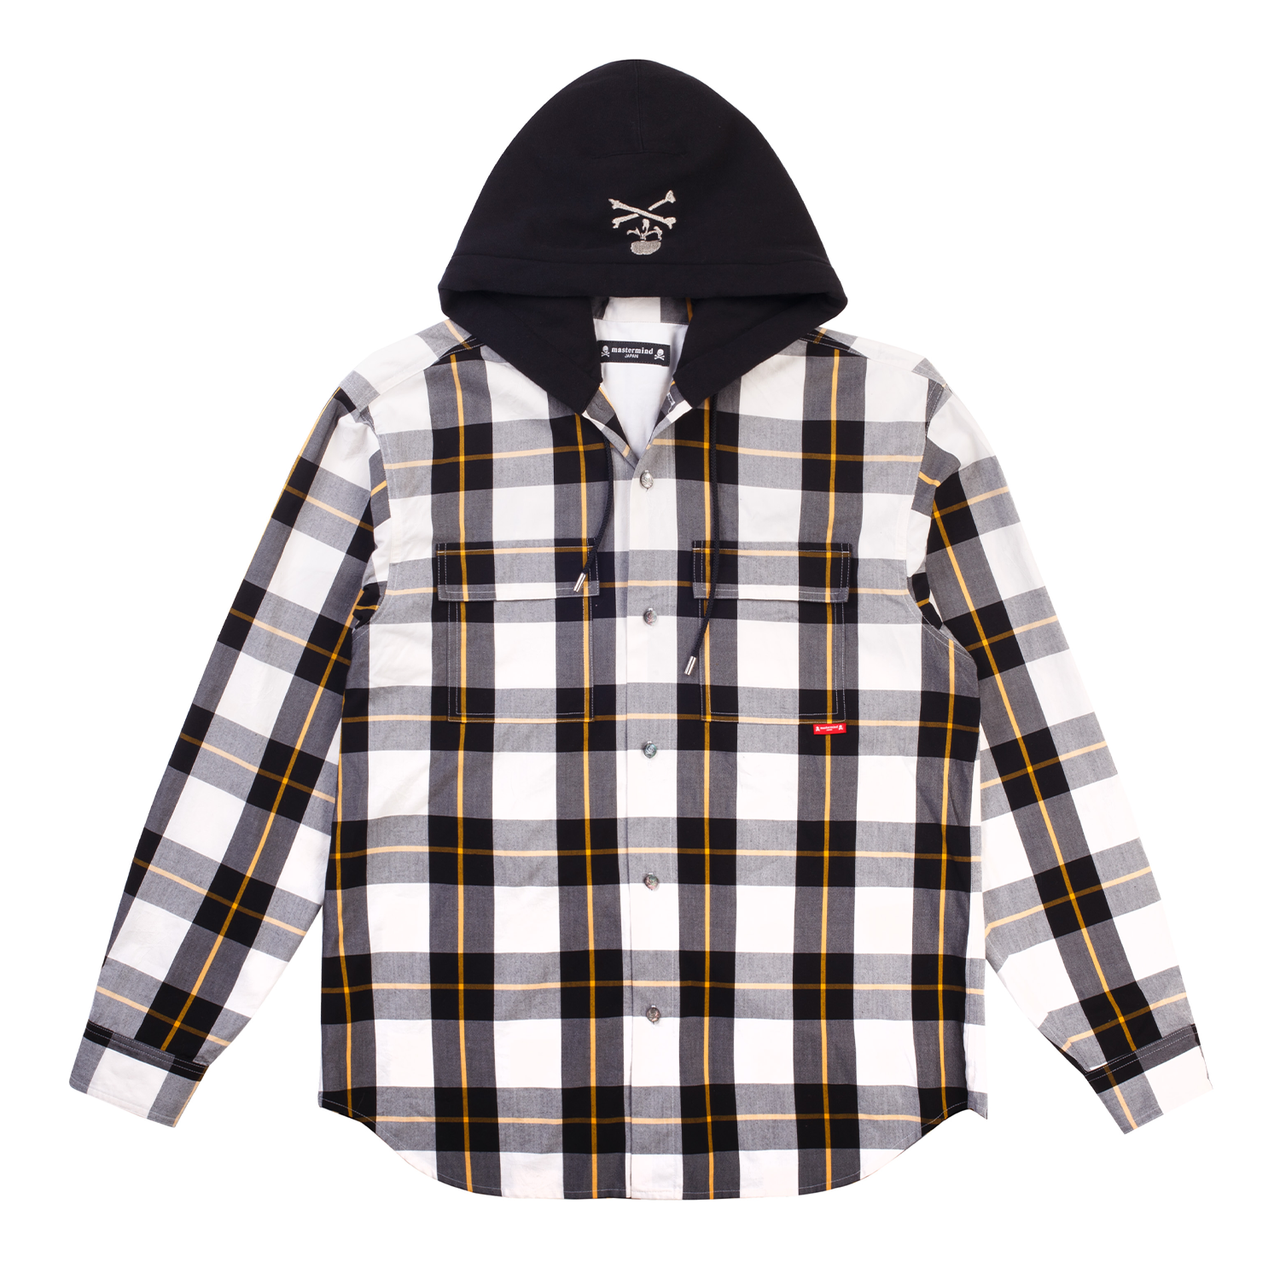 Mastermind World Checkered Hooded Overshirt White Black (Pre-Owned)